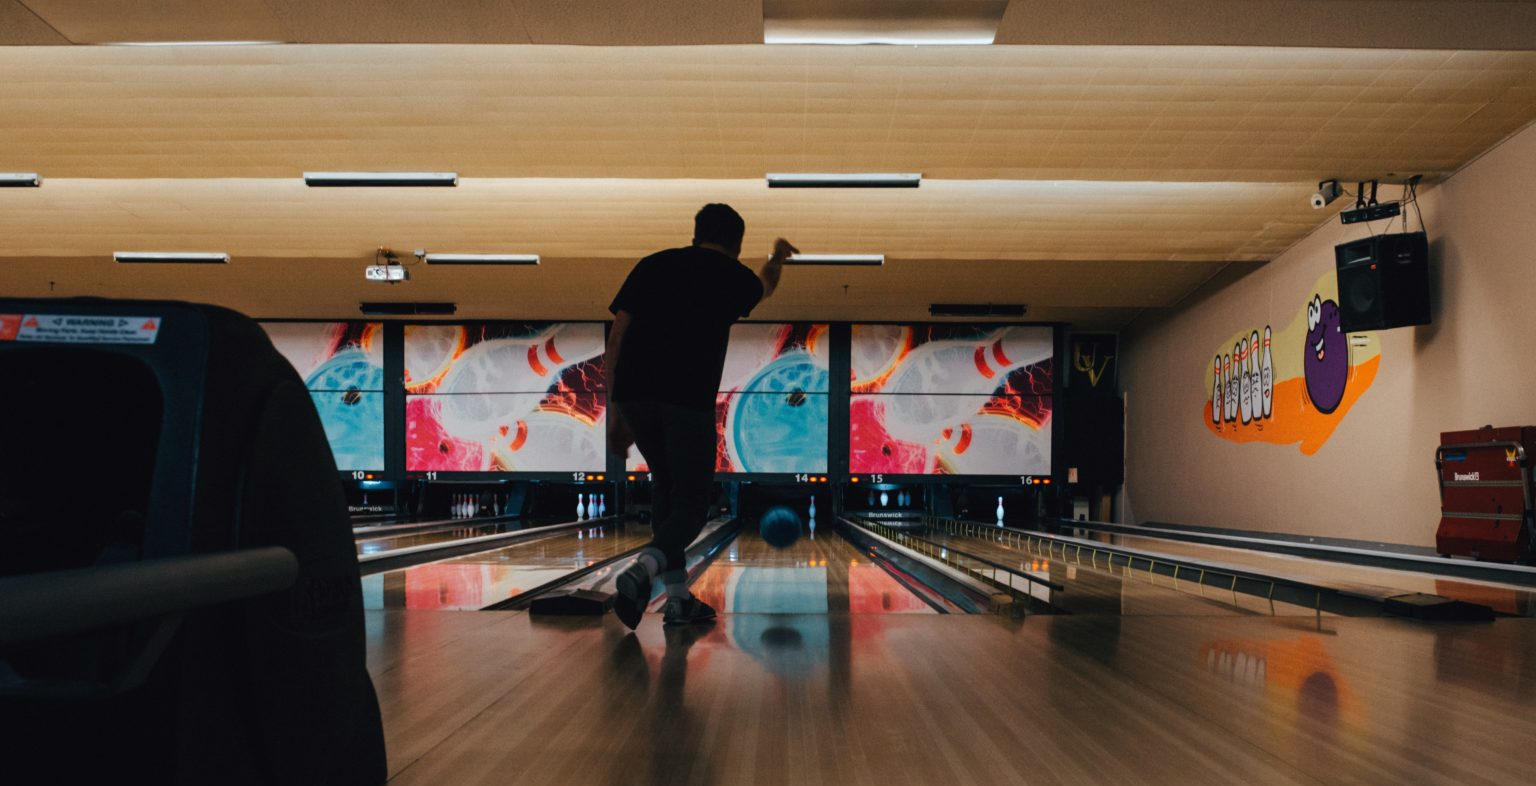 5 Ways to Take Your Bowling Game from Gutter Balls to Strikes